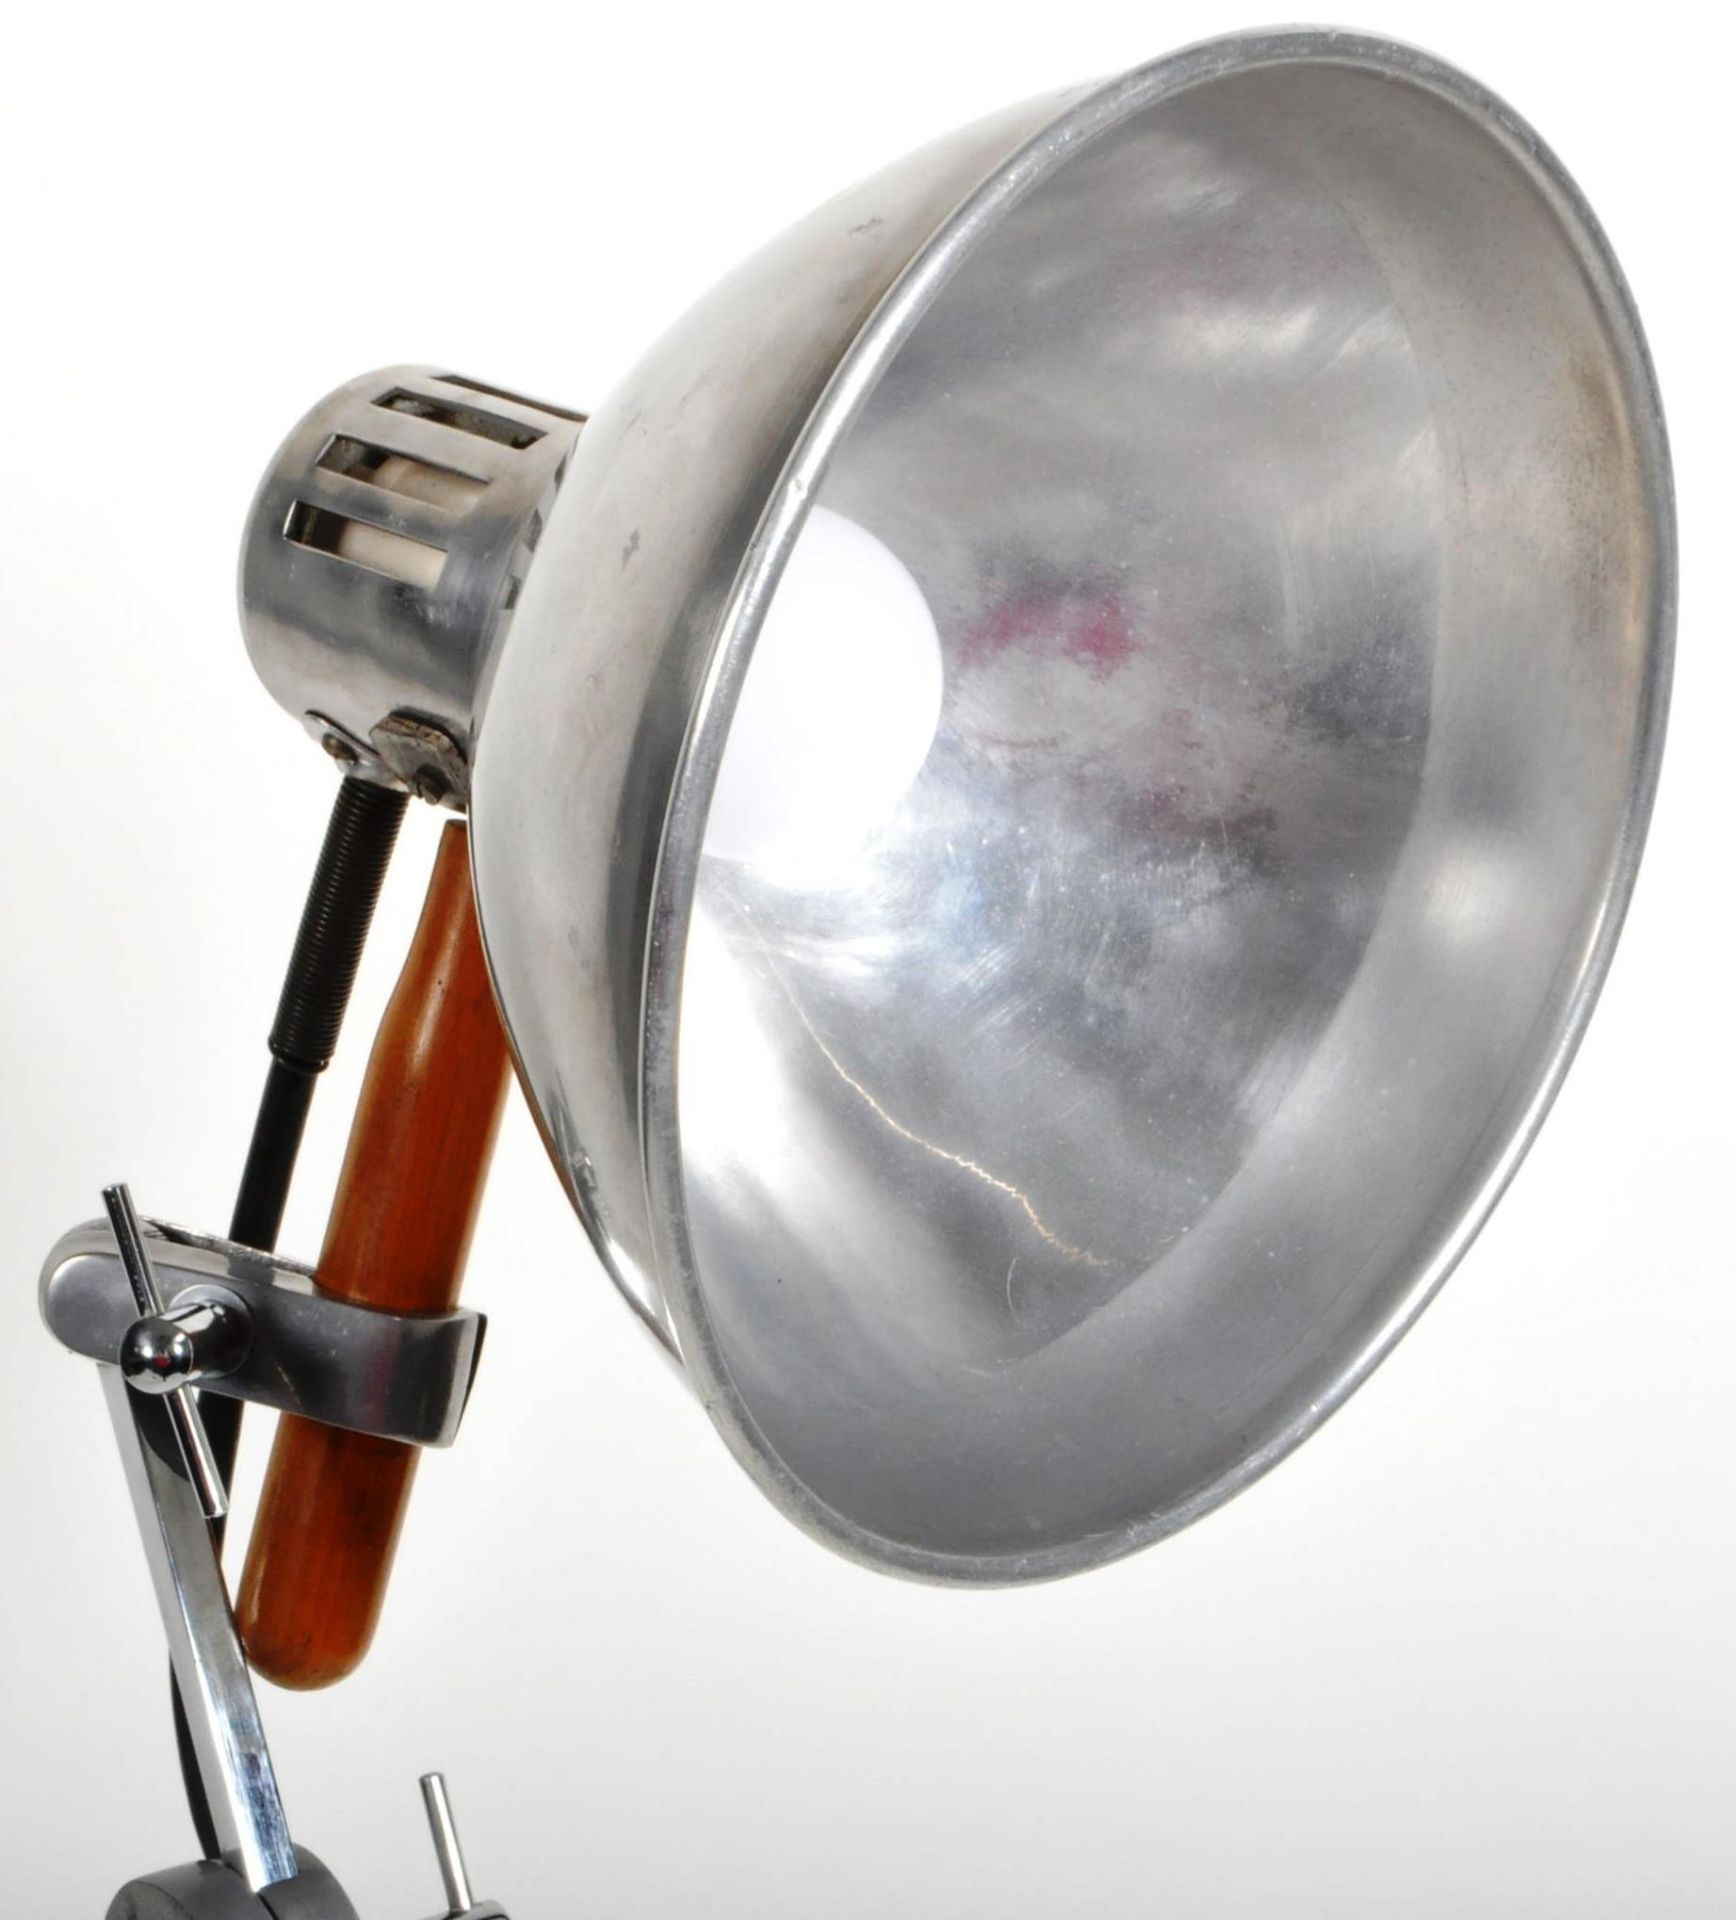 ELECTRO MEDICAL SUPPLIES 1950S THEATRE LAMP LIGHT - Image 2 of 6